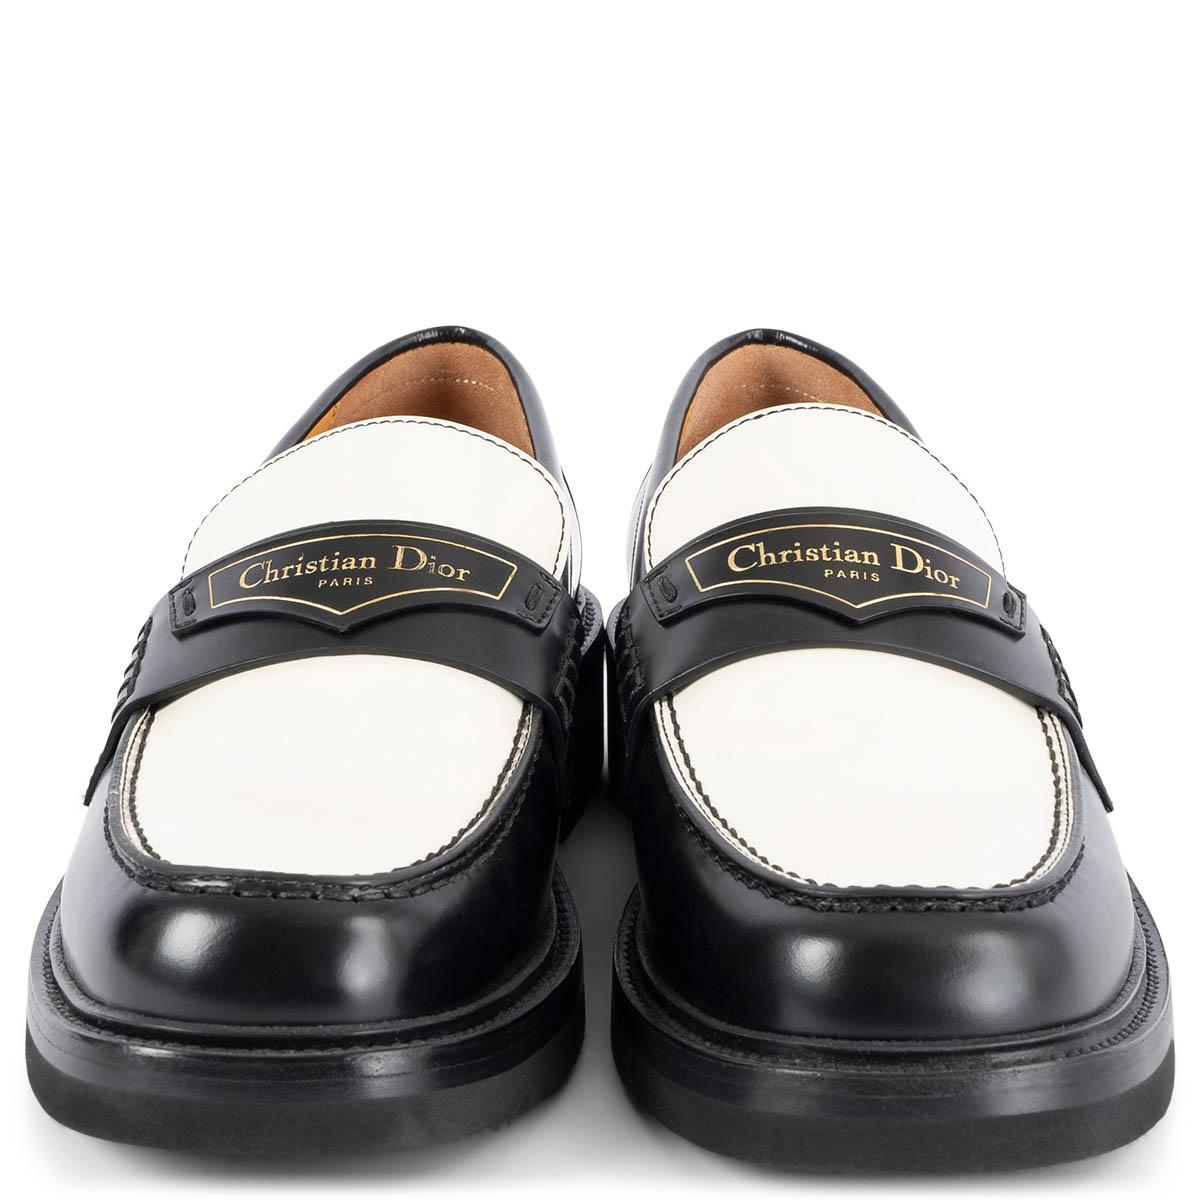 100% authentic Christian Dior Boy loafers in black & white calfskin featuring gold-tone 'Christian Dior PARIS' signature on a leather tag in the front and a black rubber sole. Brand new.

Measurements
Model	KDB759ACA_S11X
Imprinted Size	38.5
Shoe